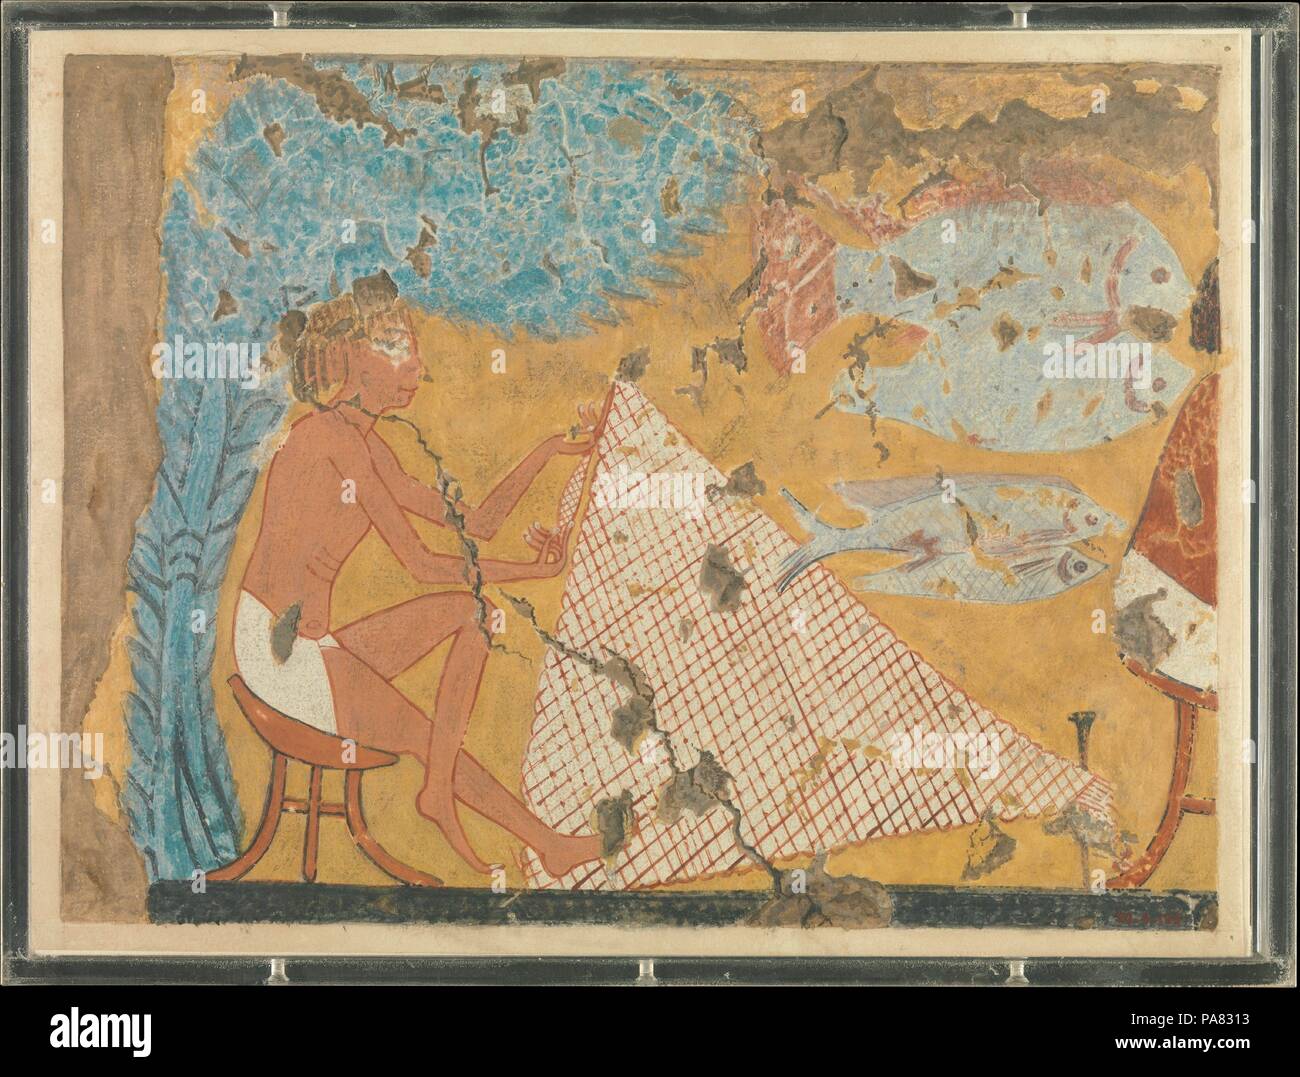 Man Making a Net, Tomb of Ipuy. Artist: Norman de Garis Davies (1865-1941). Dimensions: H. 20 cm (7 7/8 in); w. 27 cm (10 5/8 in)  scale 1:1. Dynasty: Dynasty 19. Reign: reign of Ramesses II. Date: ca. 1295-1213 B.C.. Museum: Metropolitan Museum of Art, New York, USA. Stock Photo